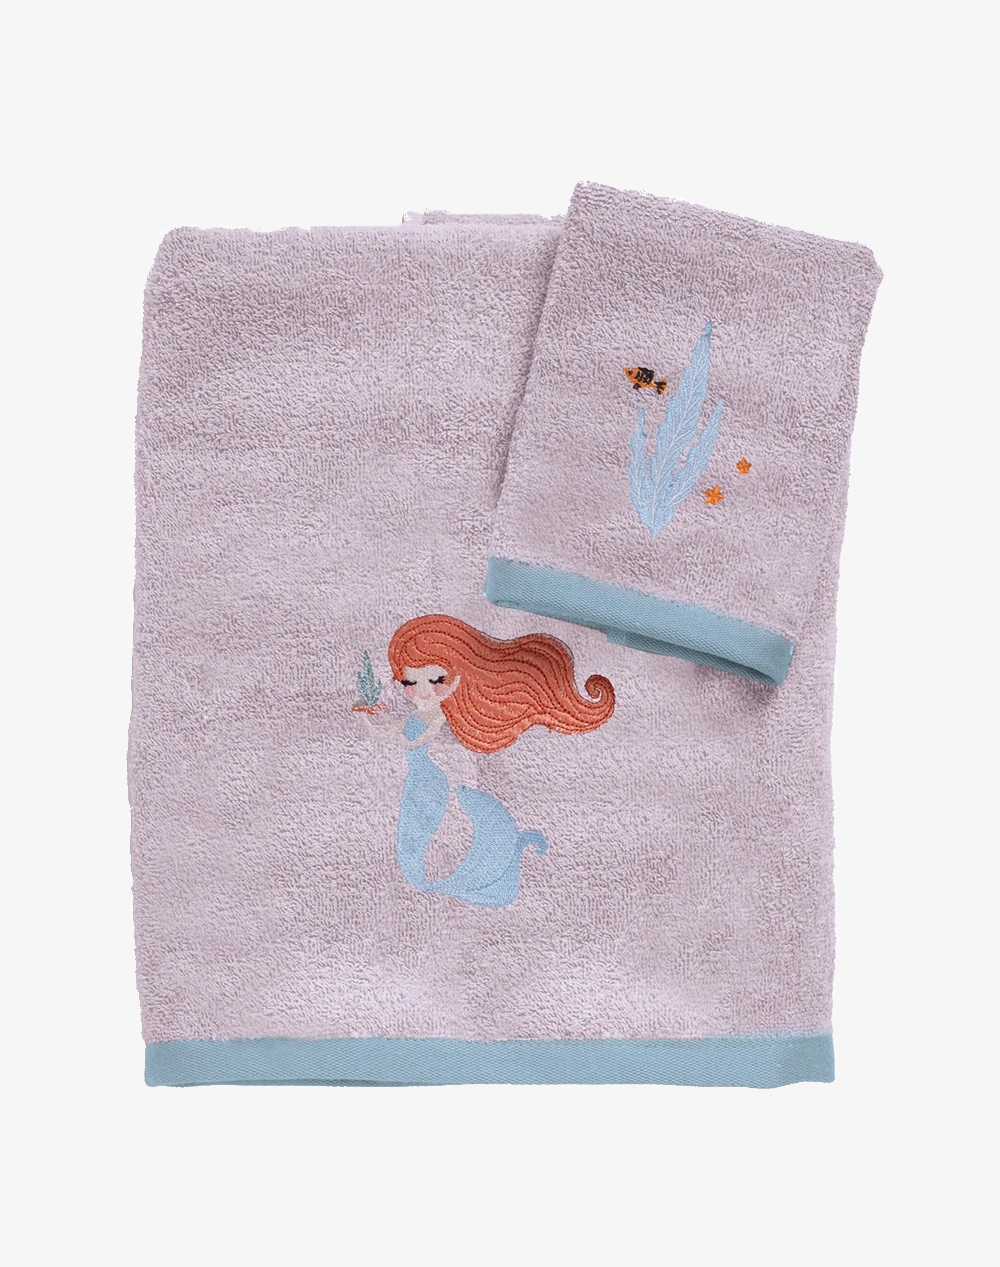 DAS 4876 TOWEL SET OF 2 PIECES EMBROIDERED BABY FUN (Dimensions: 70x140 & 30x50 cm.)